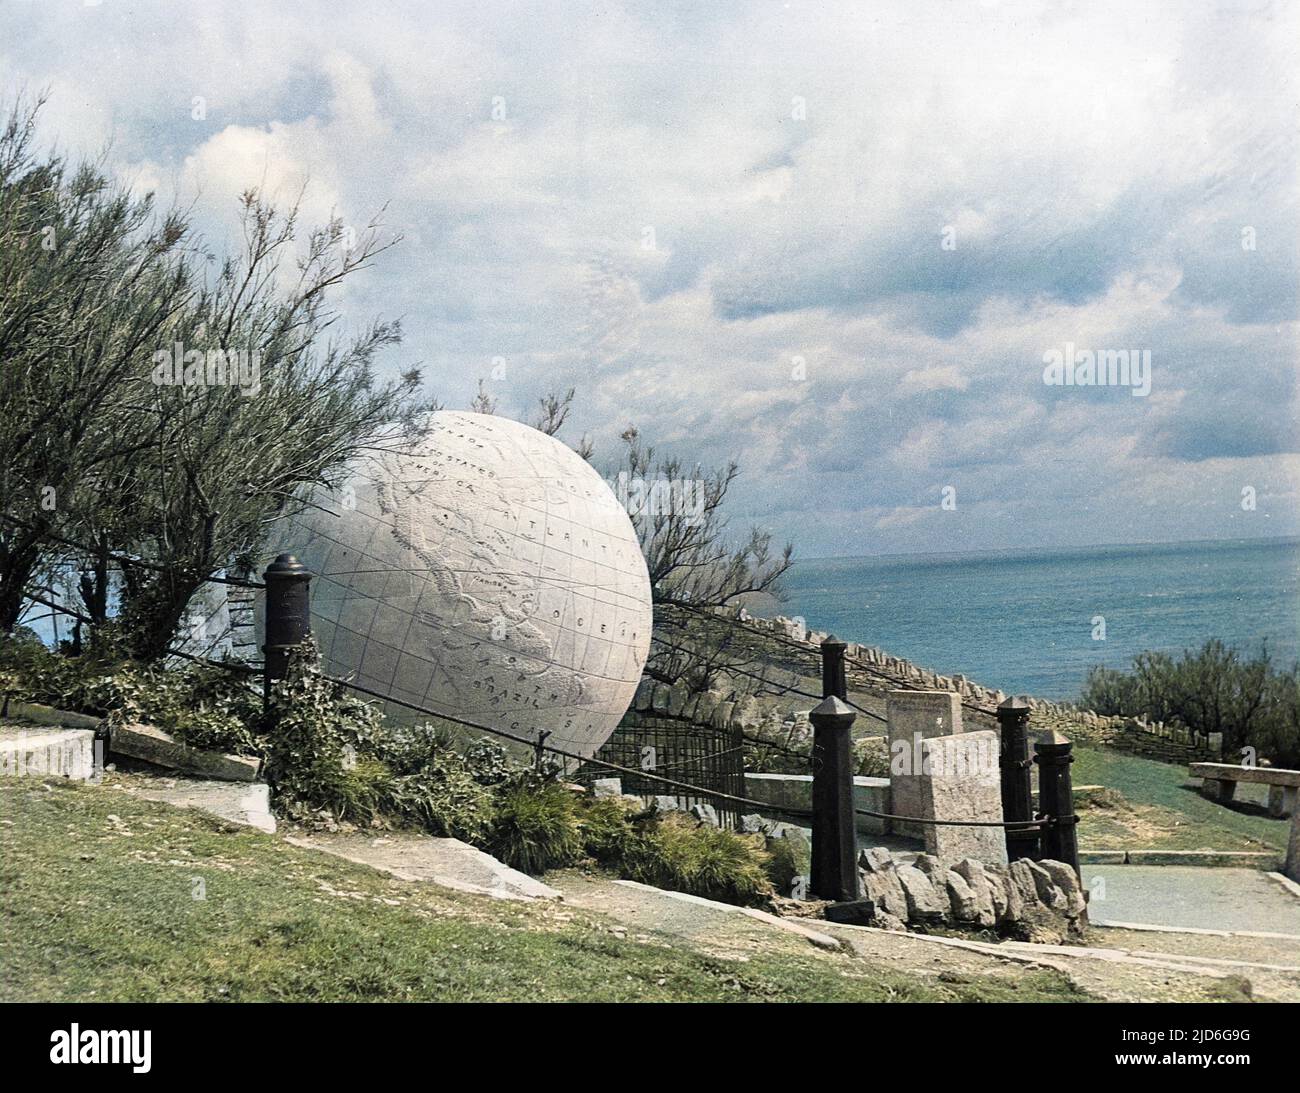 The Great Globe' at Durlston Head, near Swanage, Dorset, England. a remarkable large scale geographical sphere of the world, created for George Burt from Portland Stone. Colourised version of : 10173970       Date: 1887 Stock Photo